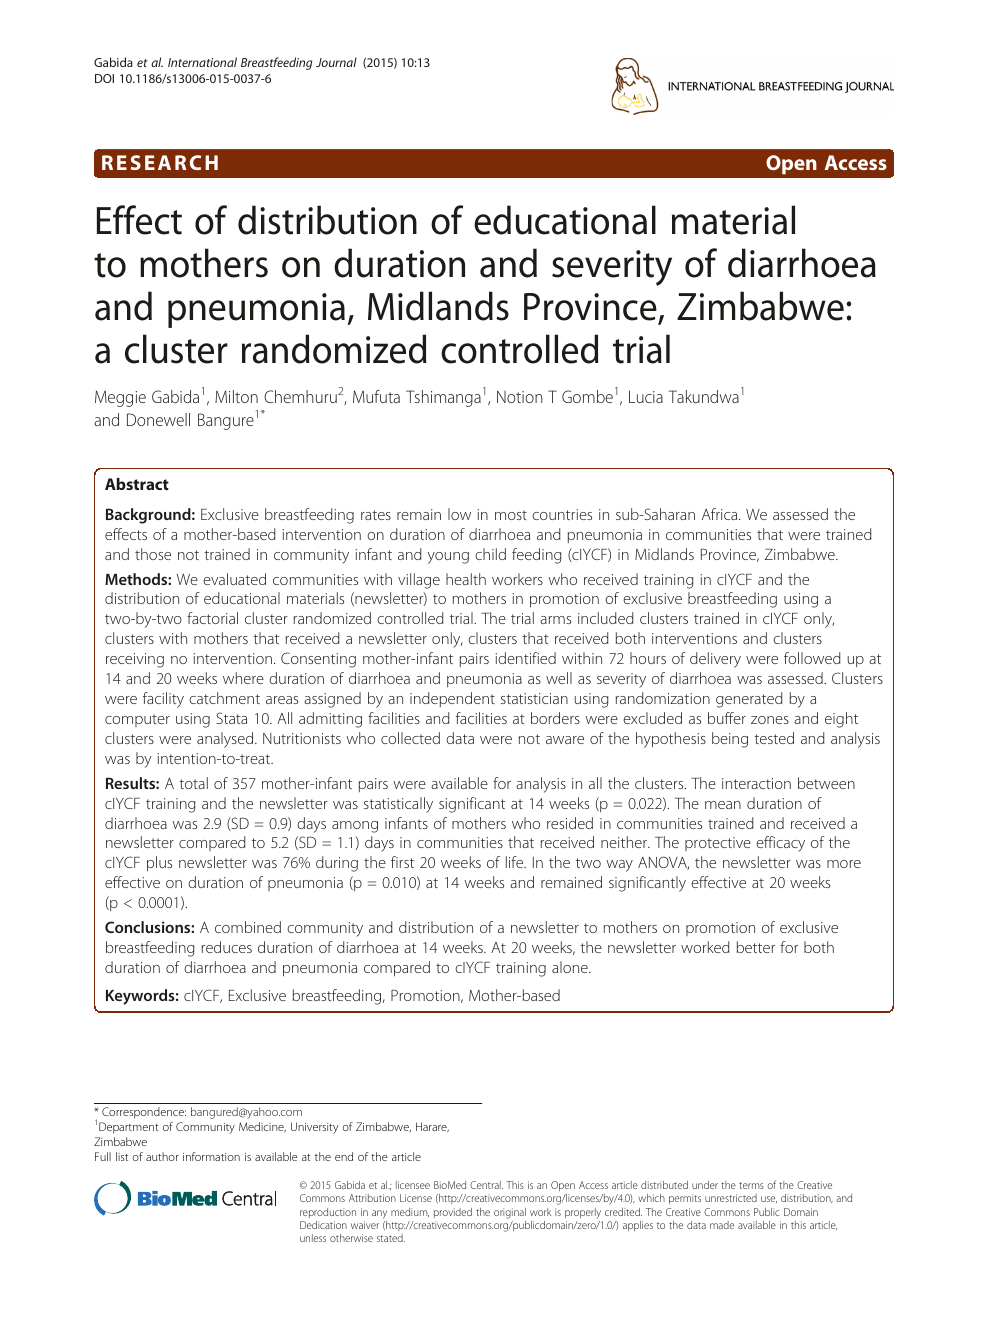 Effect of distribution of educational material to mothers on duration and severity of diarrhoea and pneumonia, Midlands Province, Zimbabwe a cluster randomized controlled trial pic picture